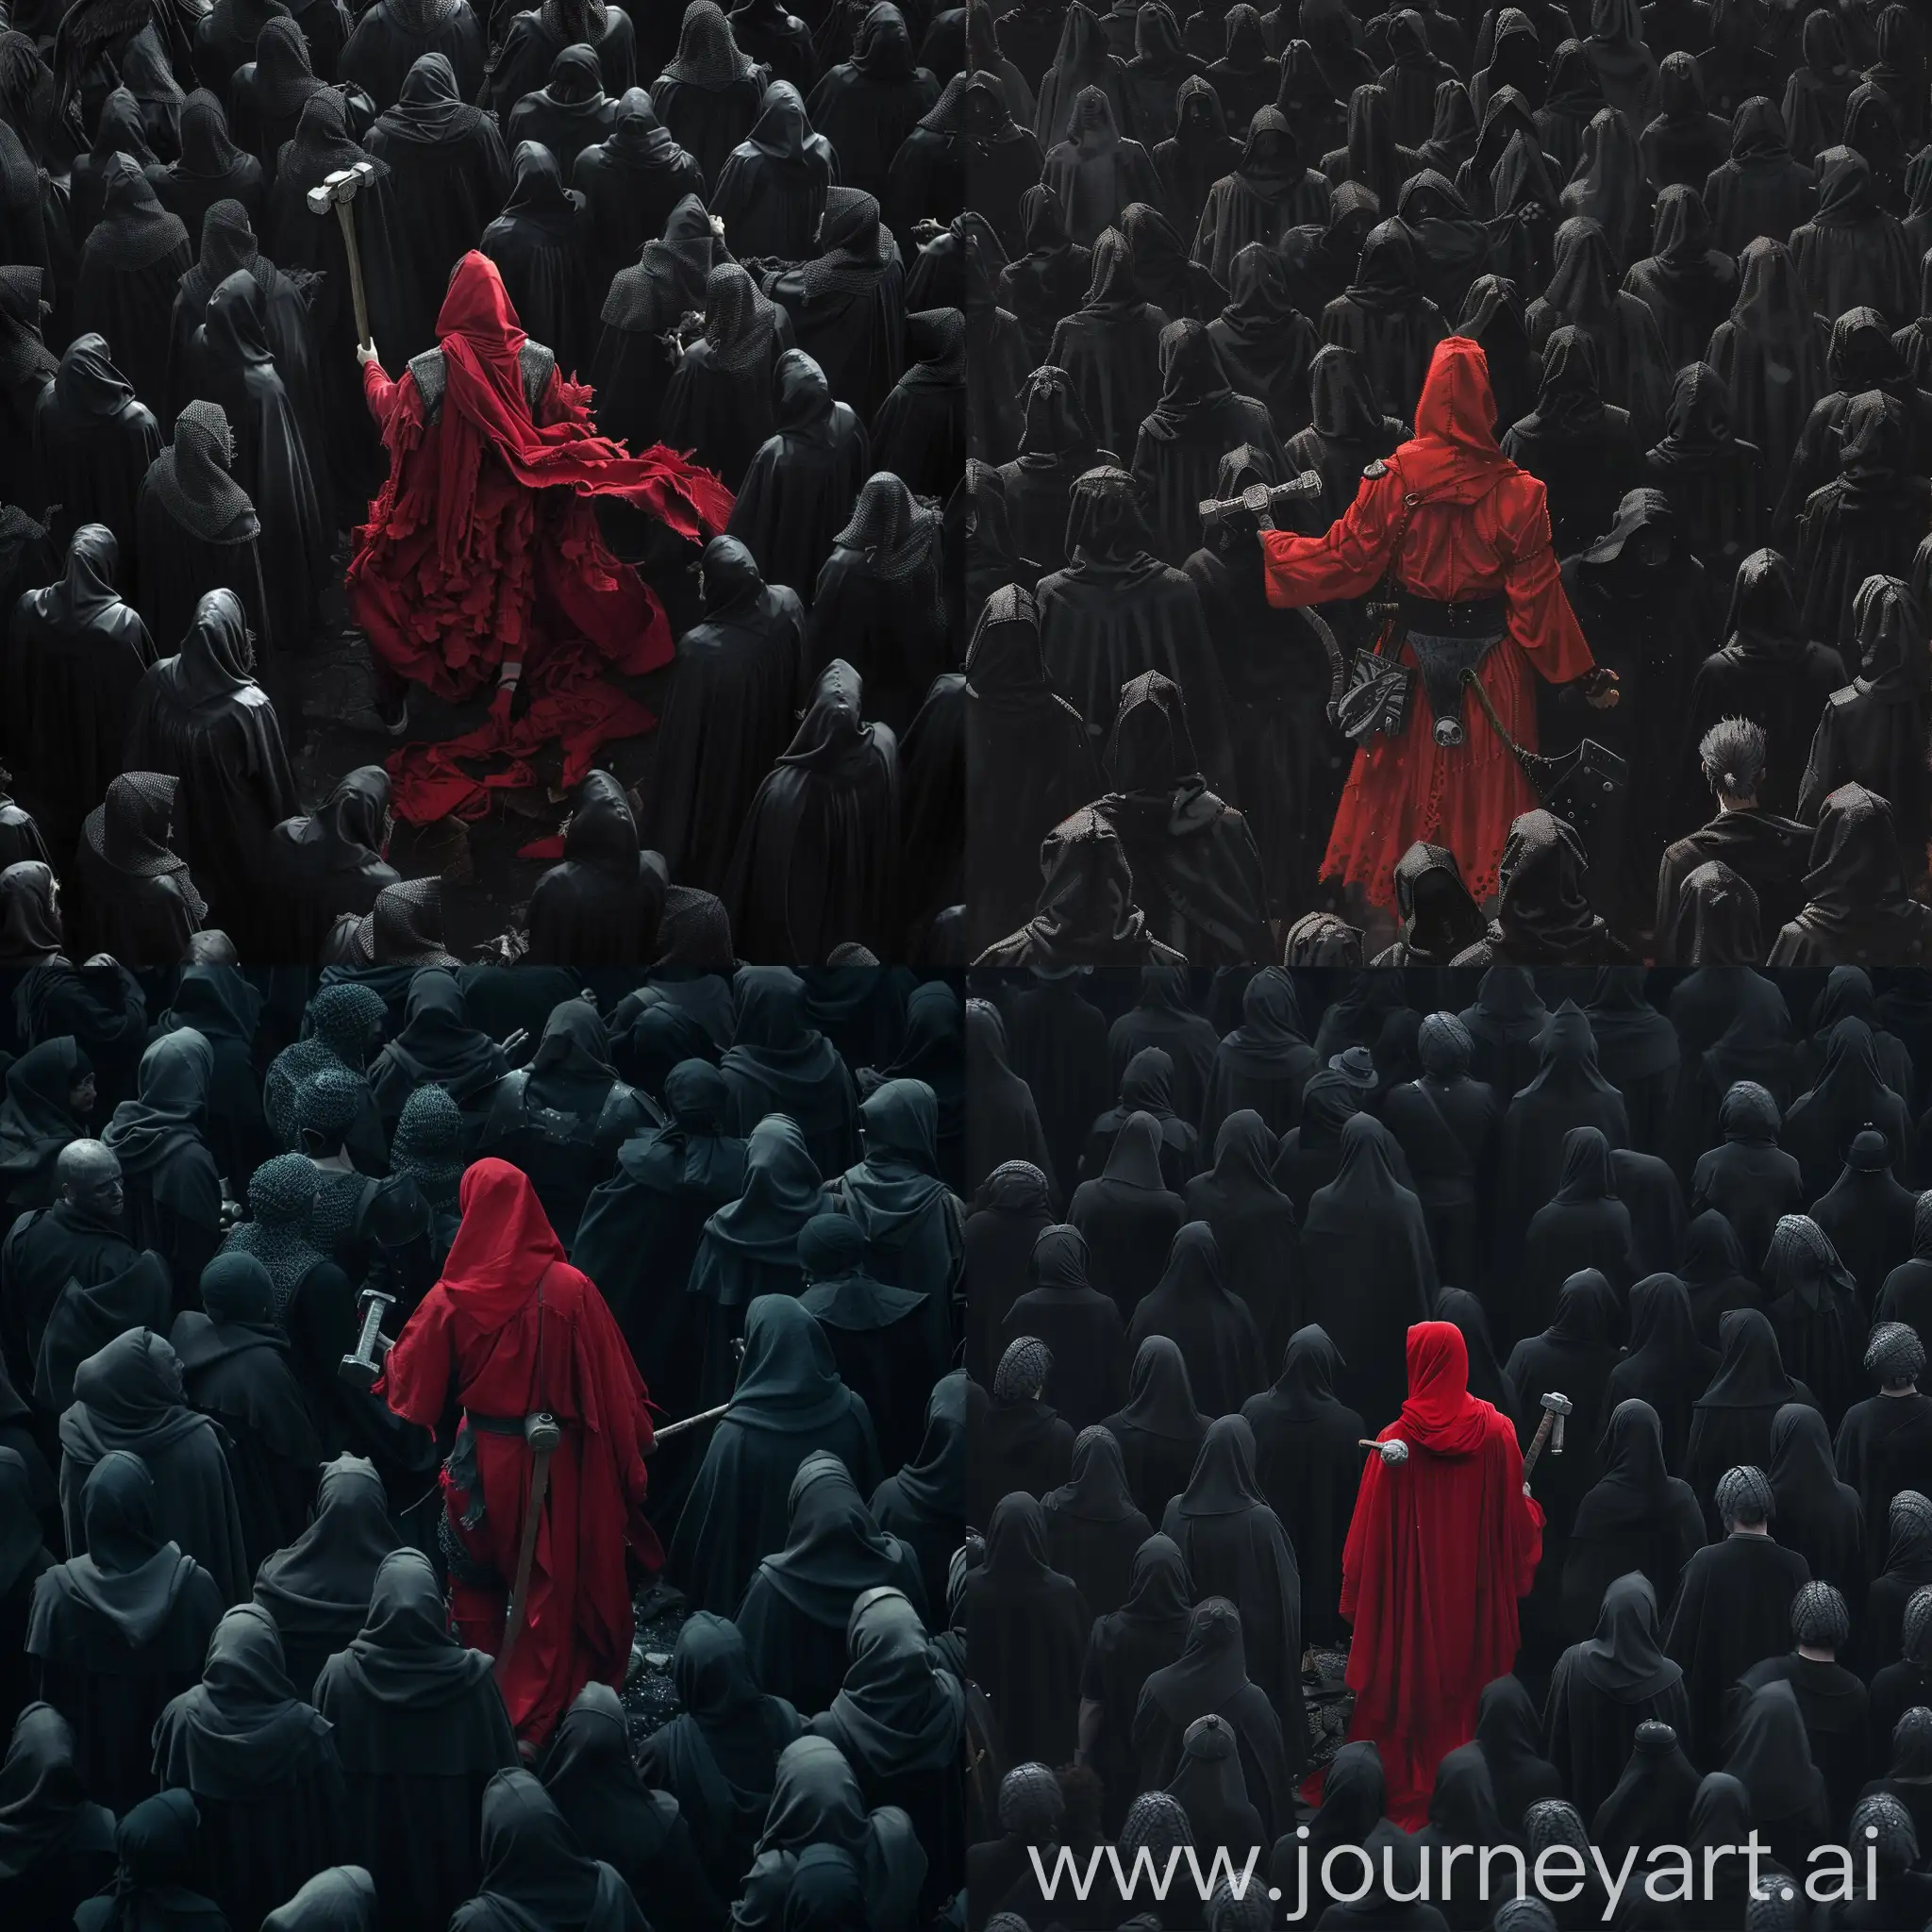 BlackClad-Crowd-with-Azrael-in-Red-Attire-and-Hammer